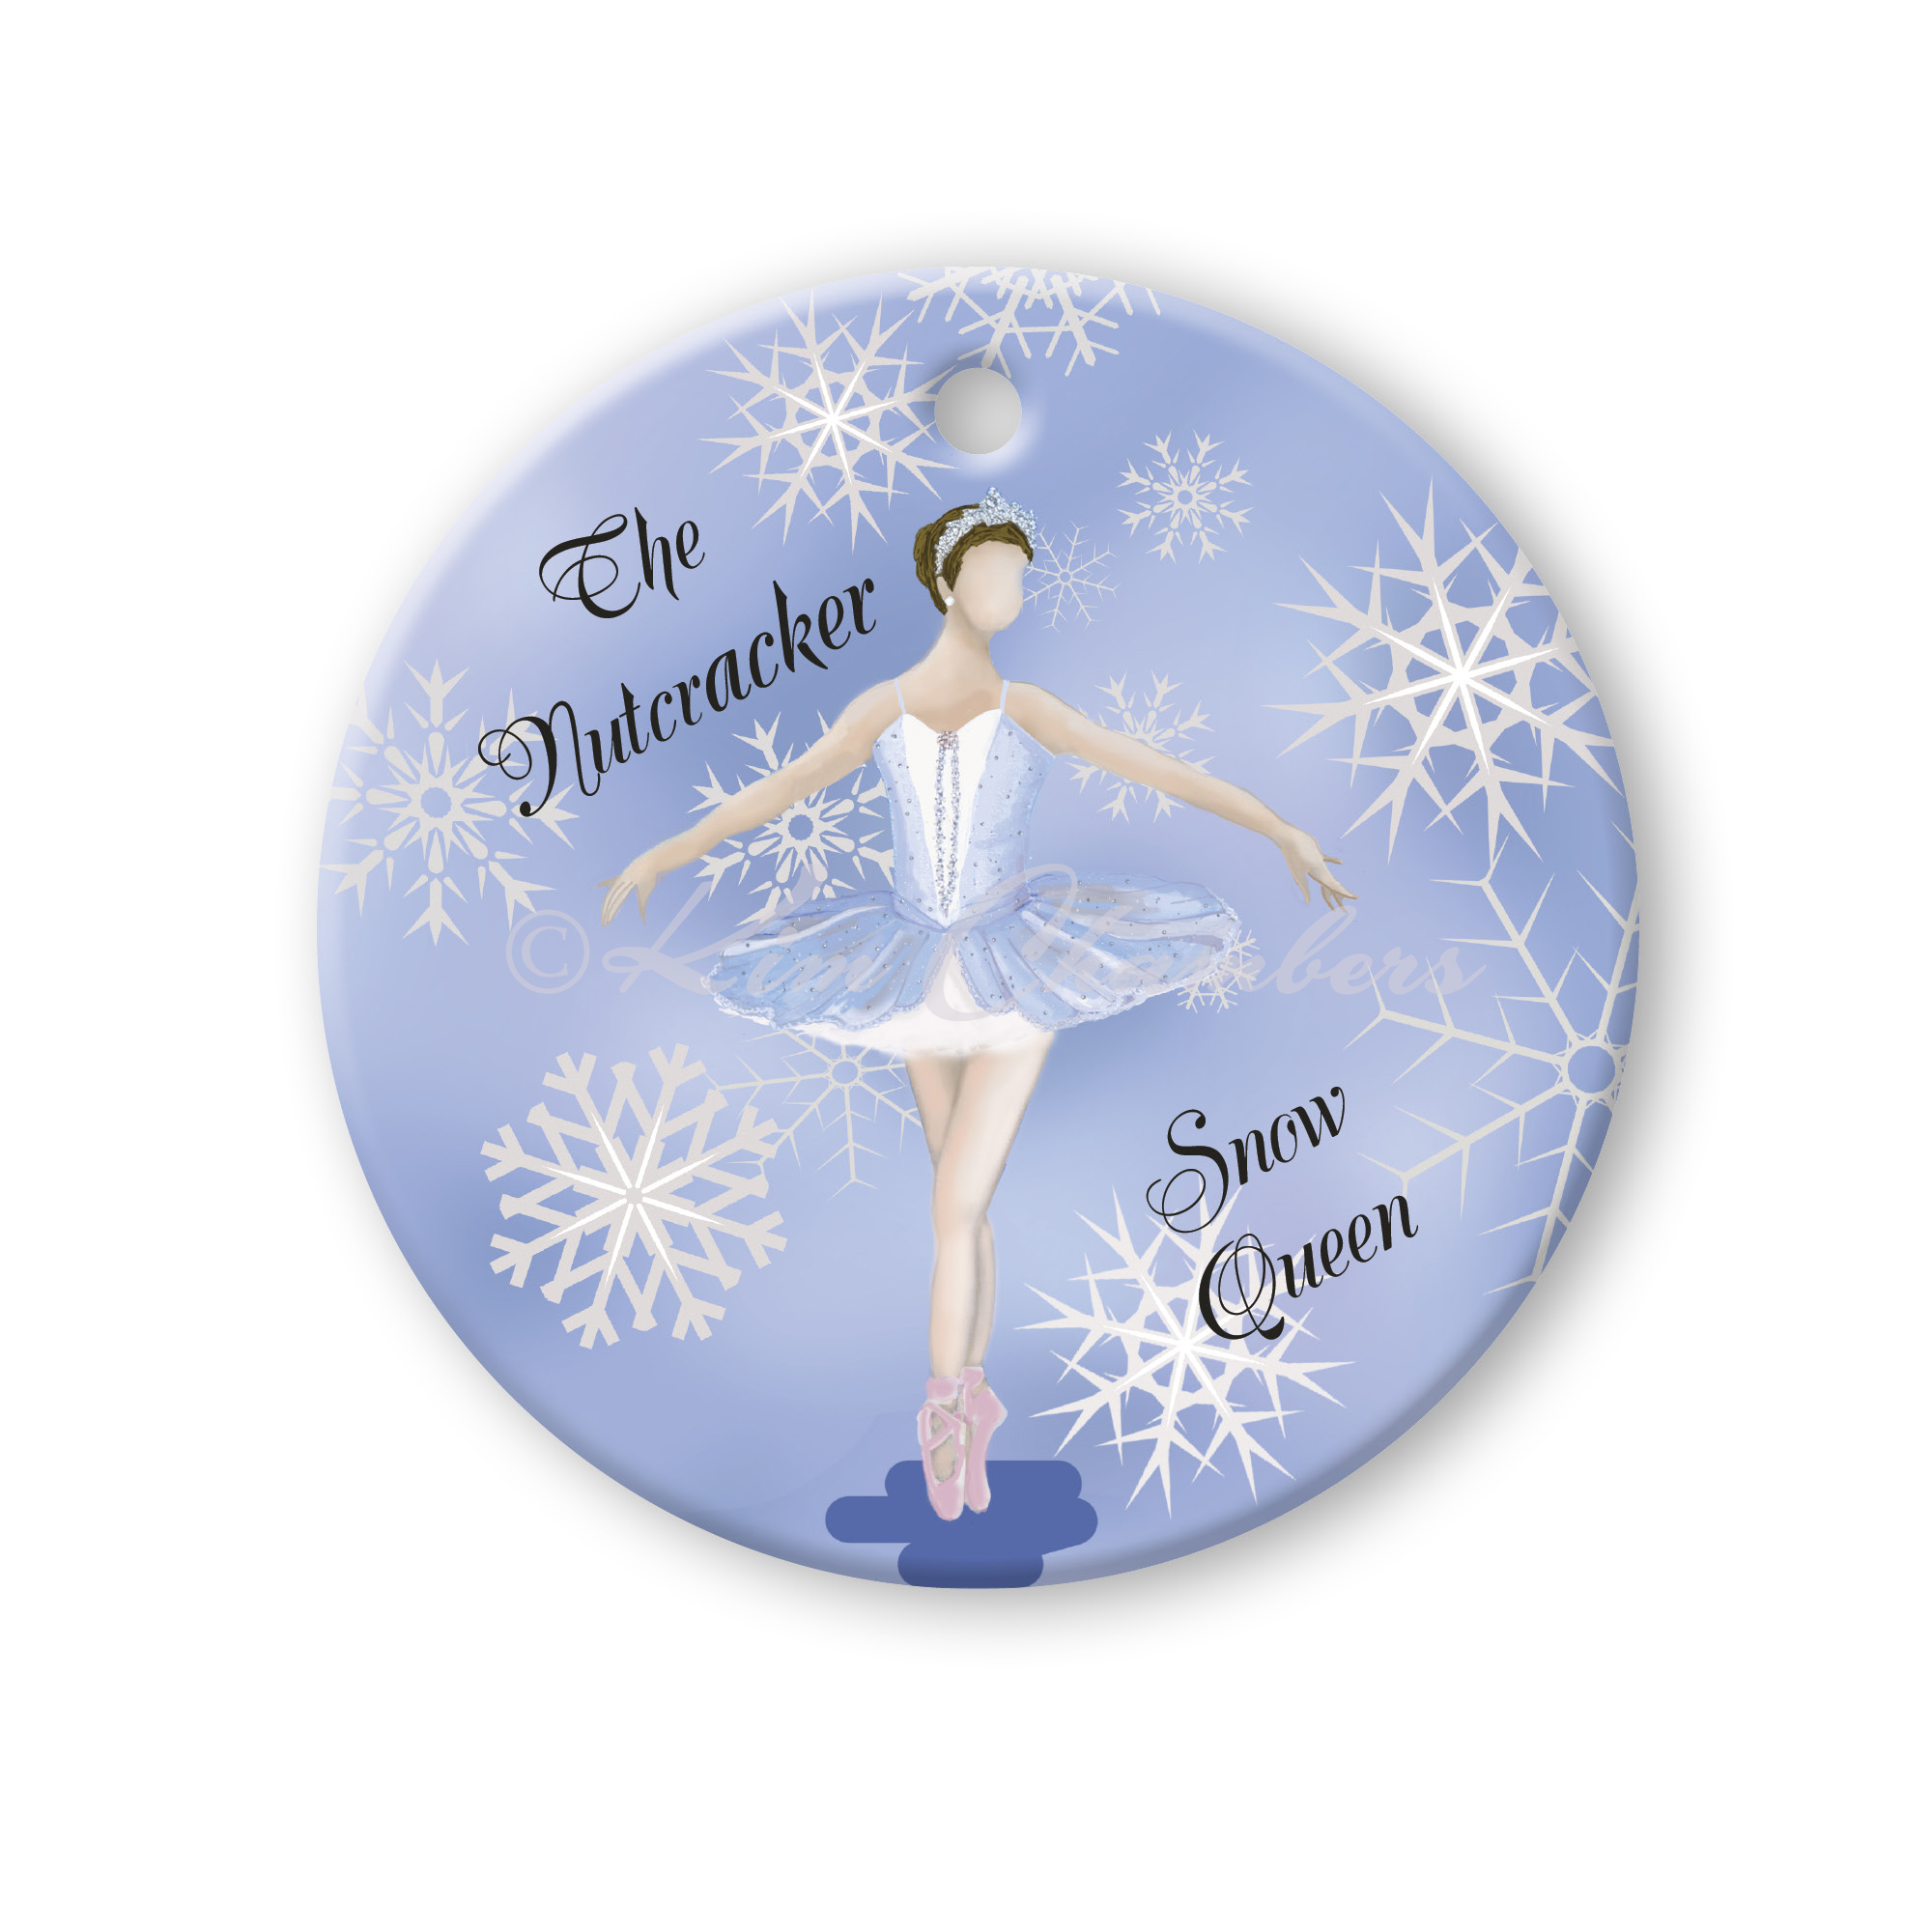 I make and sell Nutcracker Ballet Ornaments on my Etsy shop.  This is the Snow Queen